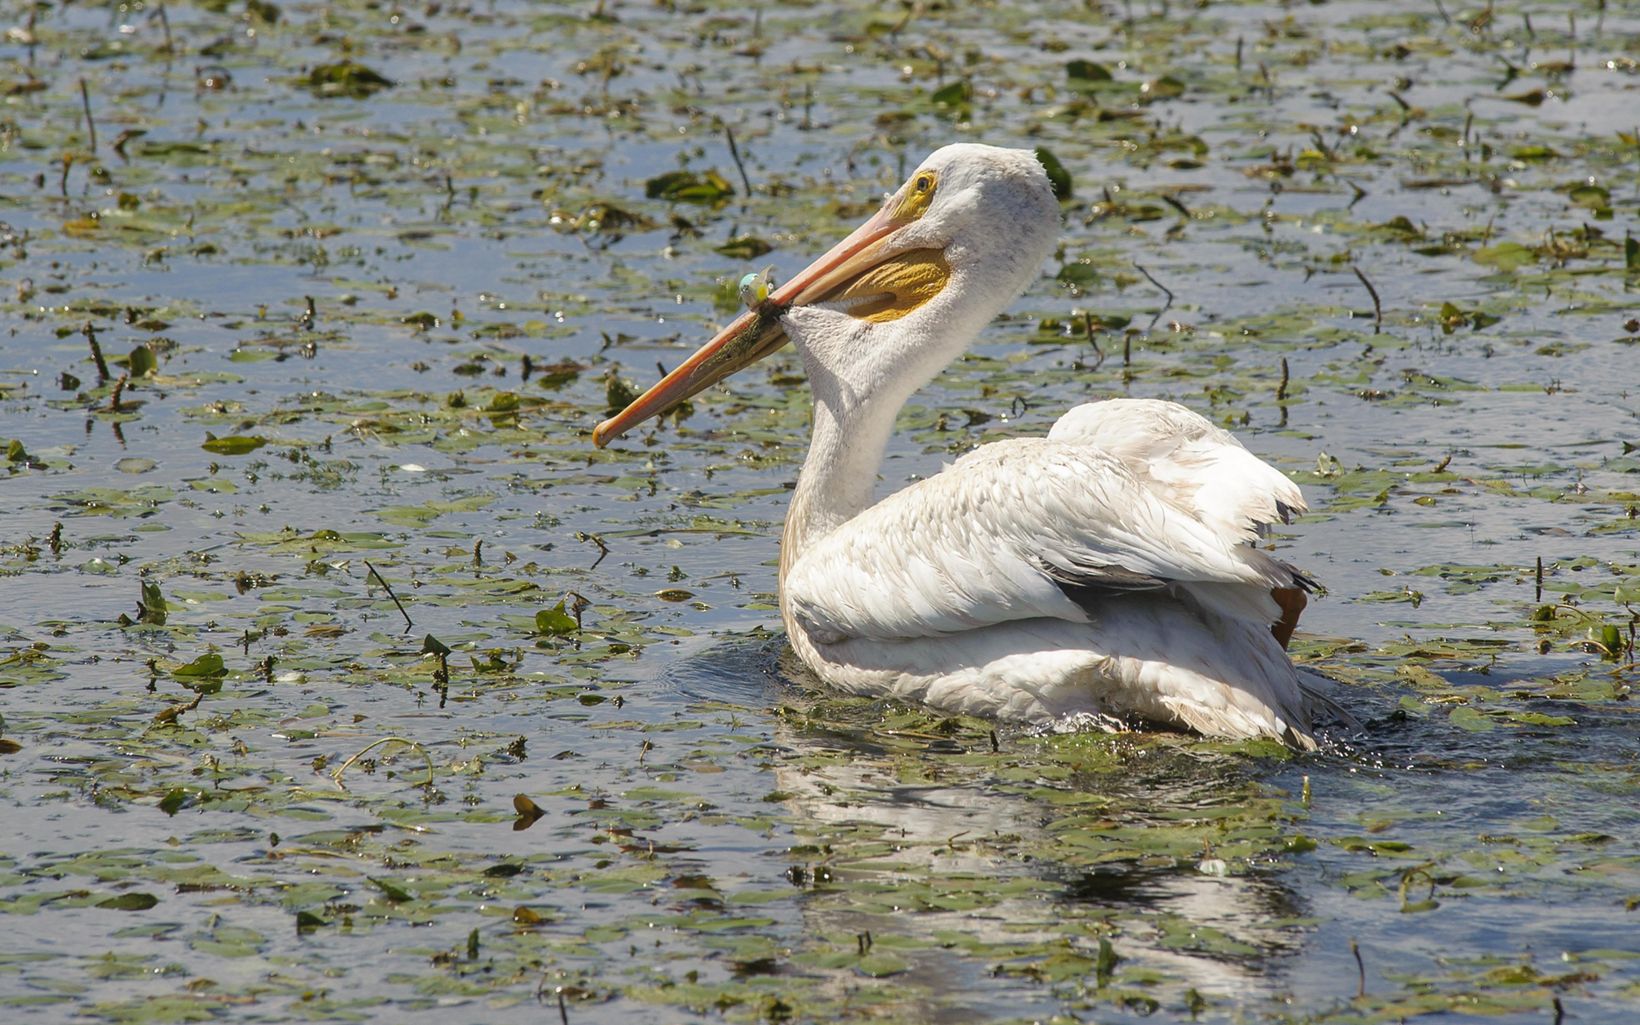 Closeup of a pelican sitting in marshy water.